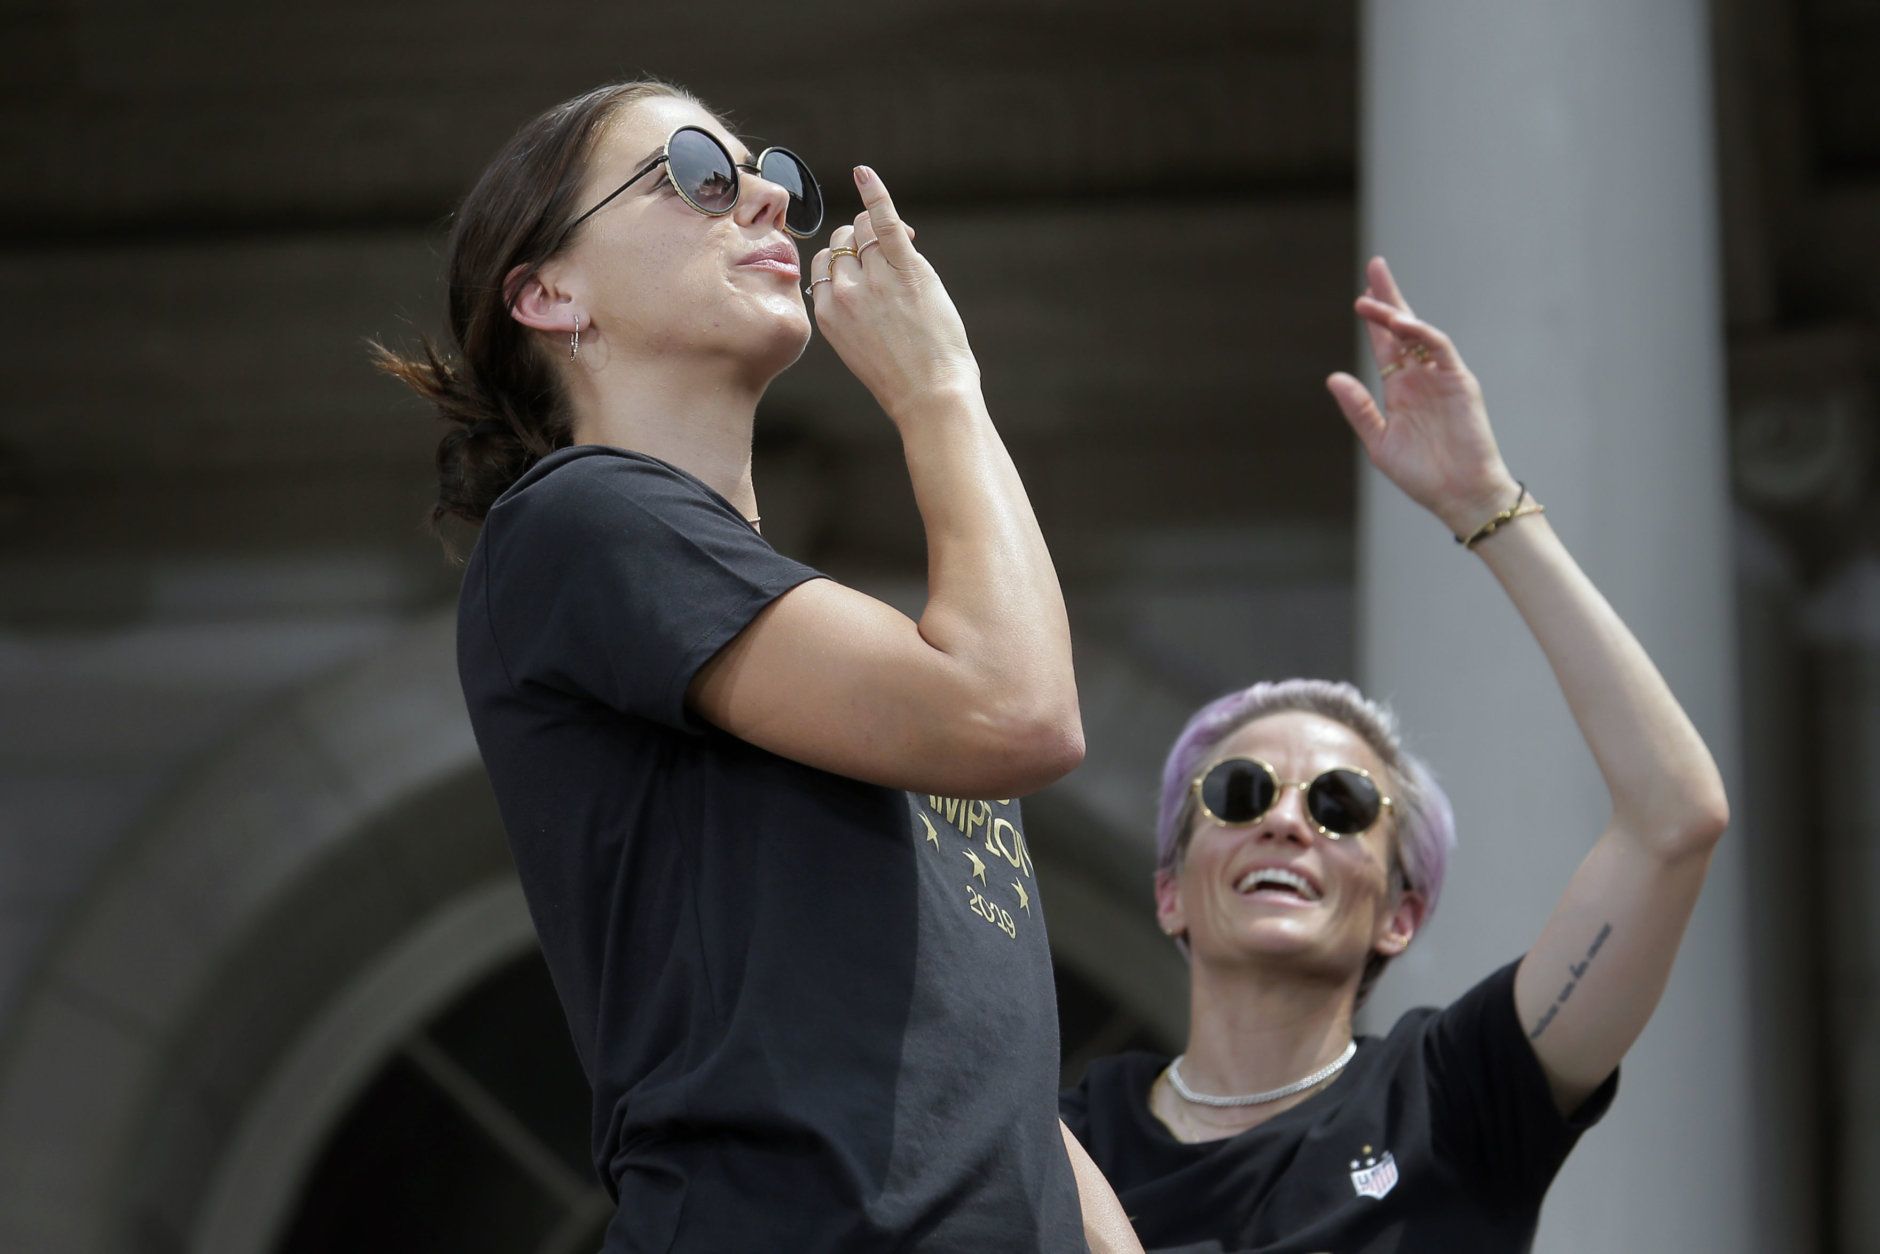 The U.S. women's soccer team captains' Alex Morgan, left, and Megan Rapinoe celebrate at City Hall after a ticker tape parade, Wednesday, July 10, 2019 in New York. The U.S. national team beat the Netherlands 2-0 to capture a record fourth Women's World Cup title. (AP Photo/Seth Wenig)